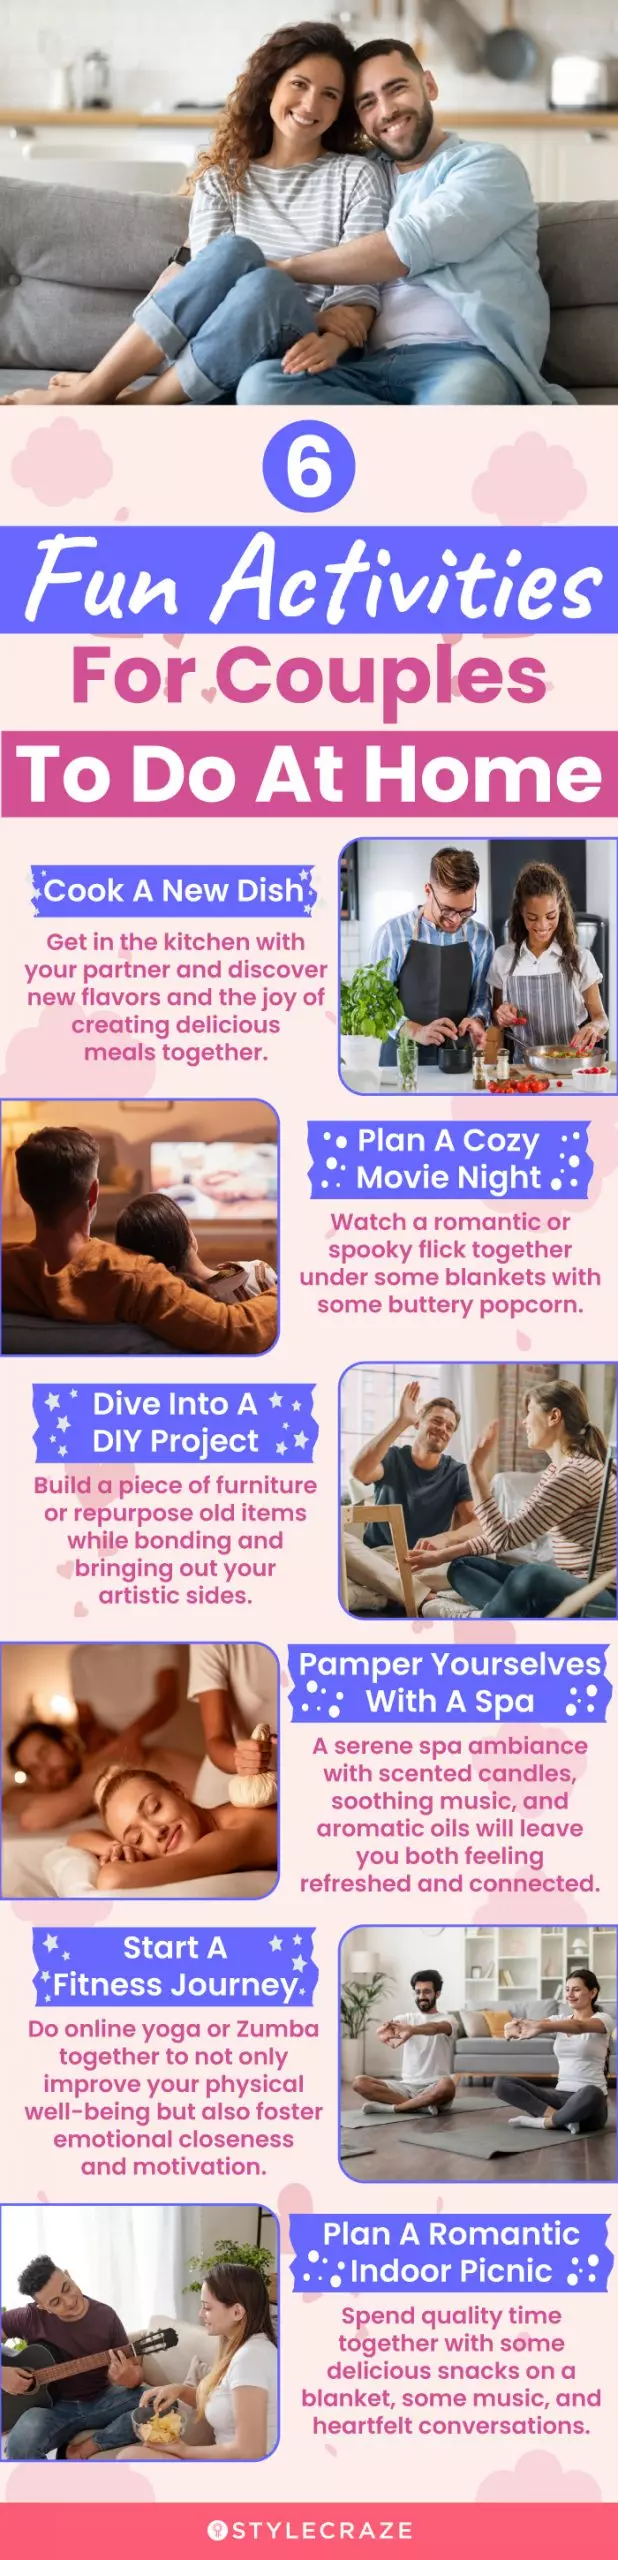 6 fun activities for couples to do at home(infographic)